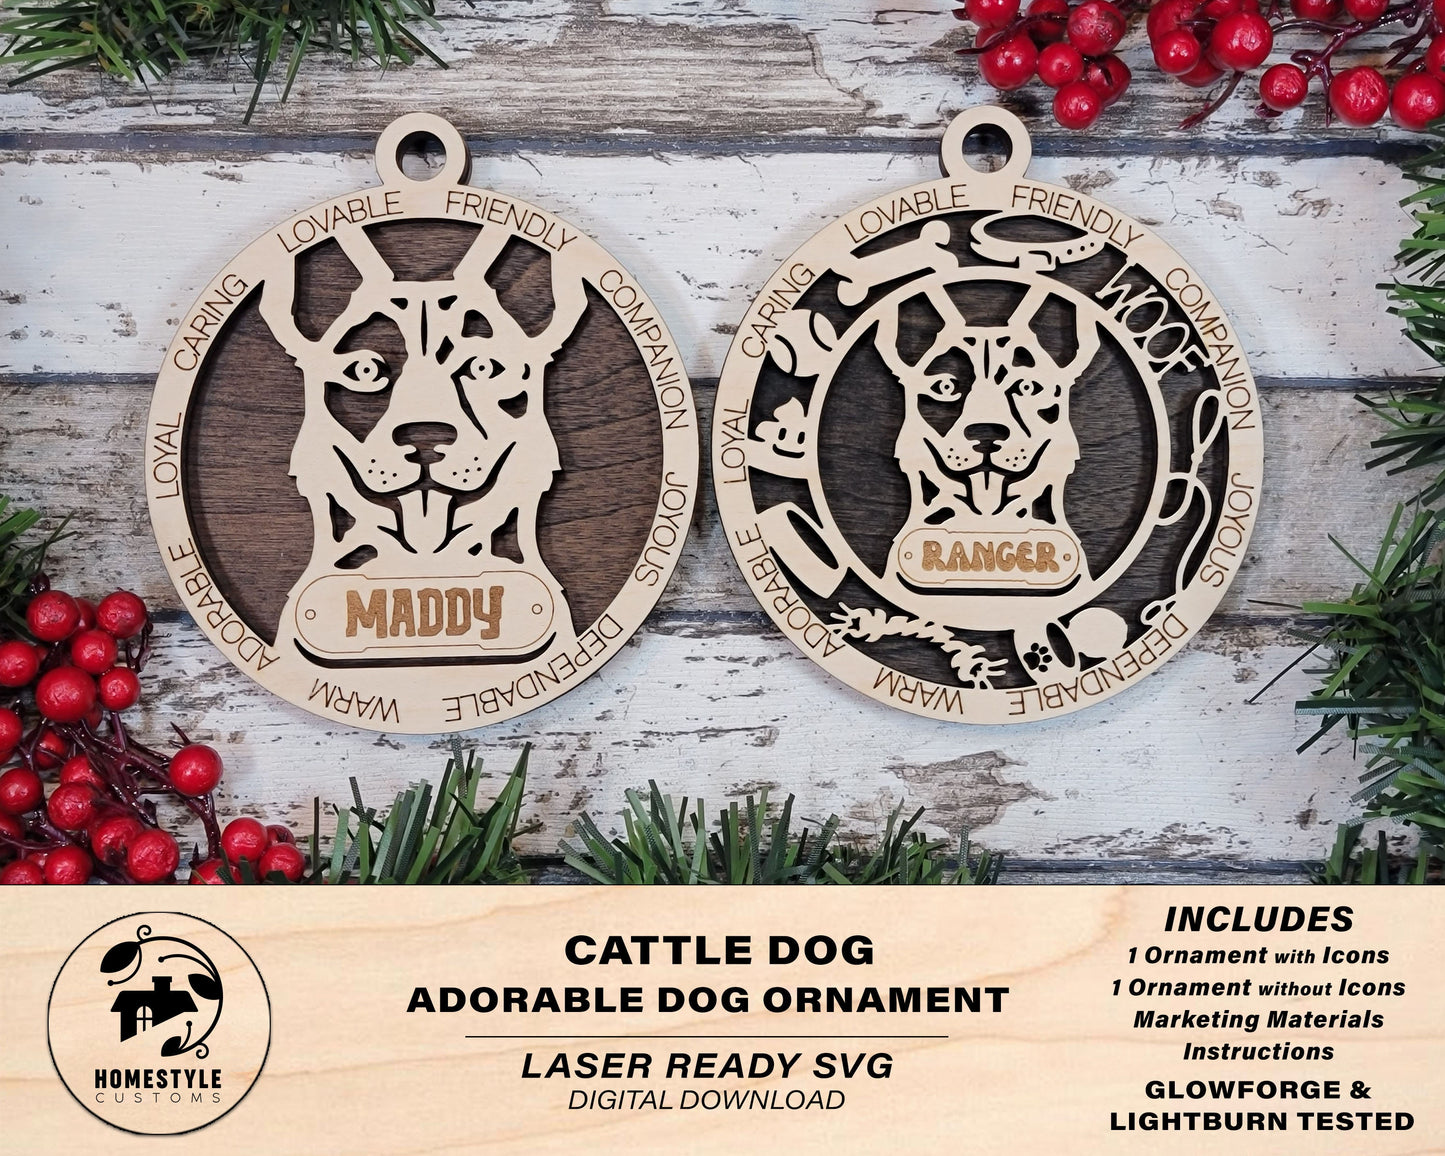 Cattle Dog - Adorable Dog Ornaments - 2 Ornaments included - SVG, PDF, AI File Download - Sized for Glowforge